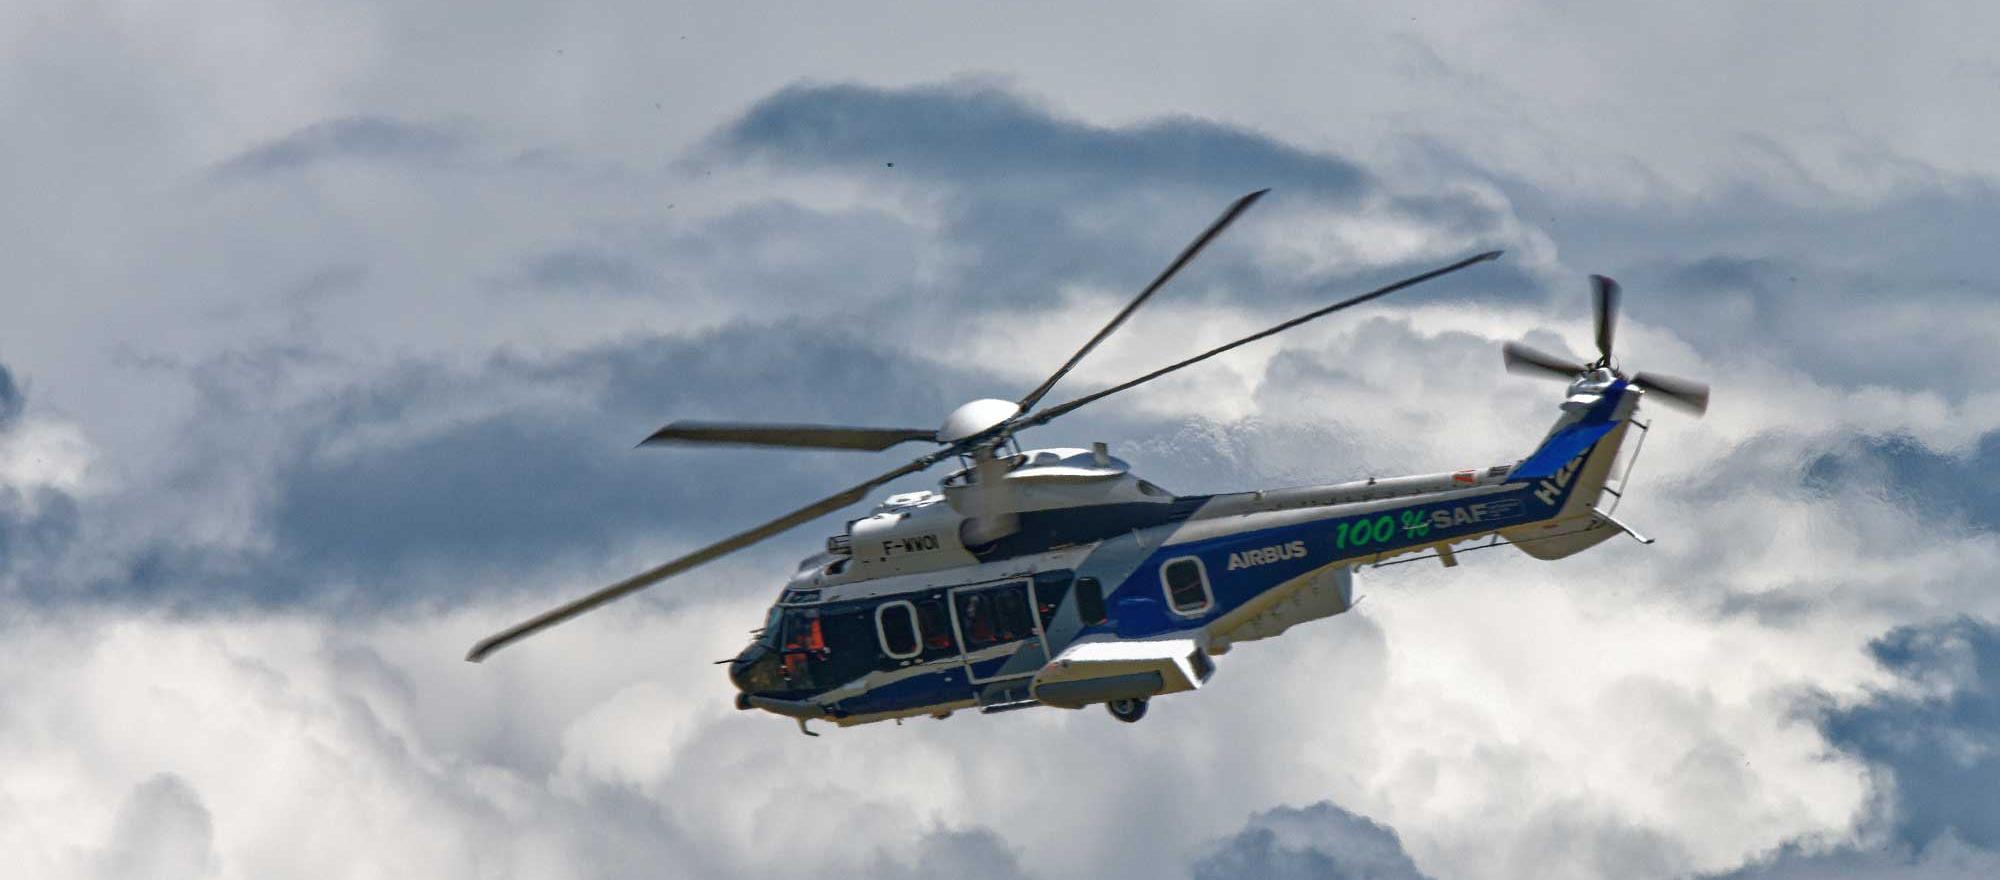 Airbus H225 in flight using 100% sustainable aviation fuel